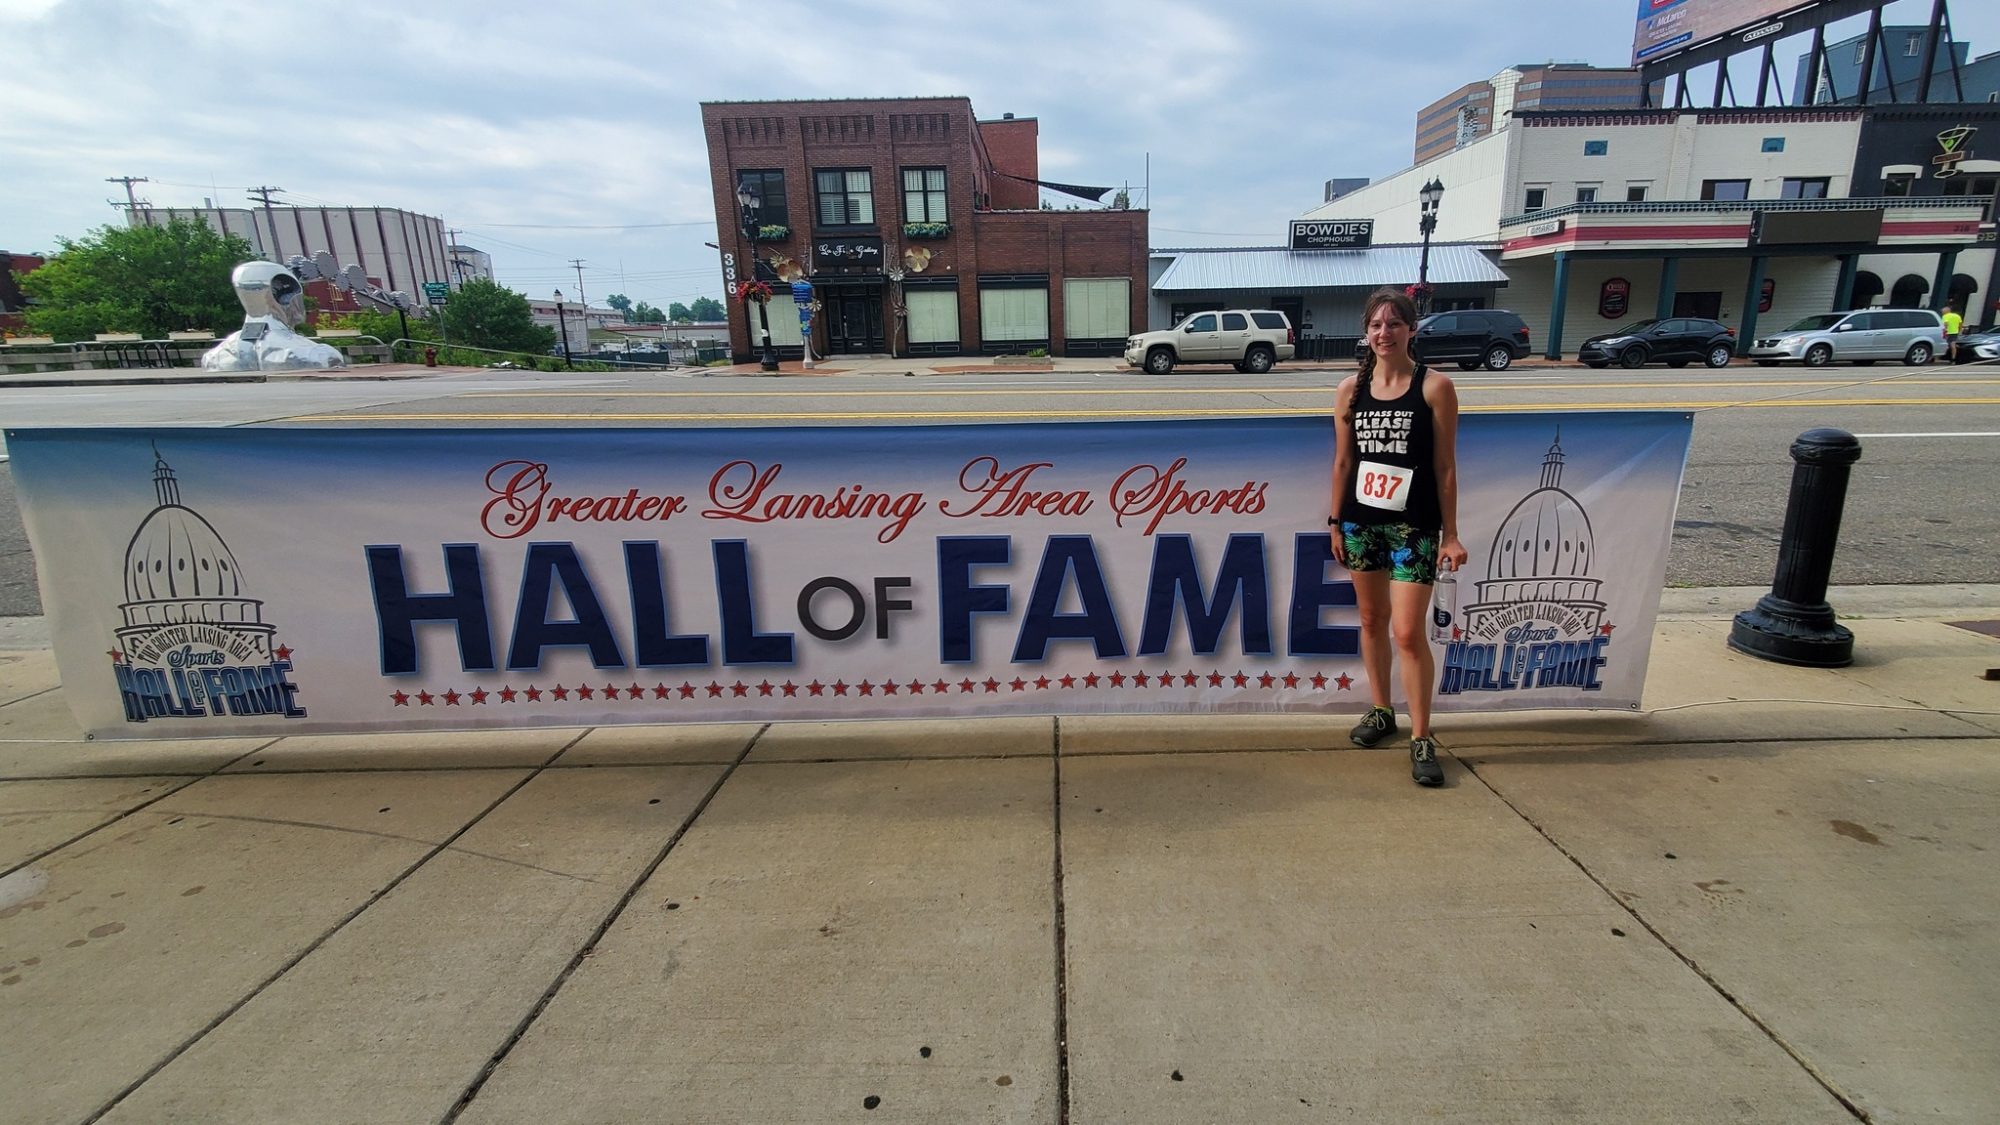 Amie in front of the Hall of Fame Sign